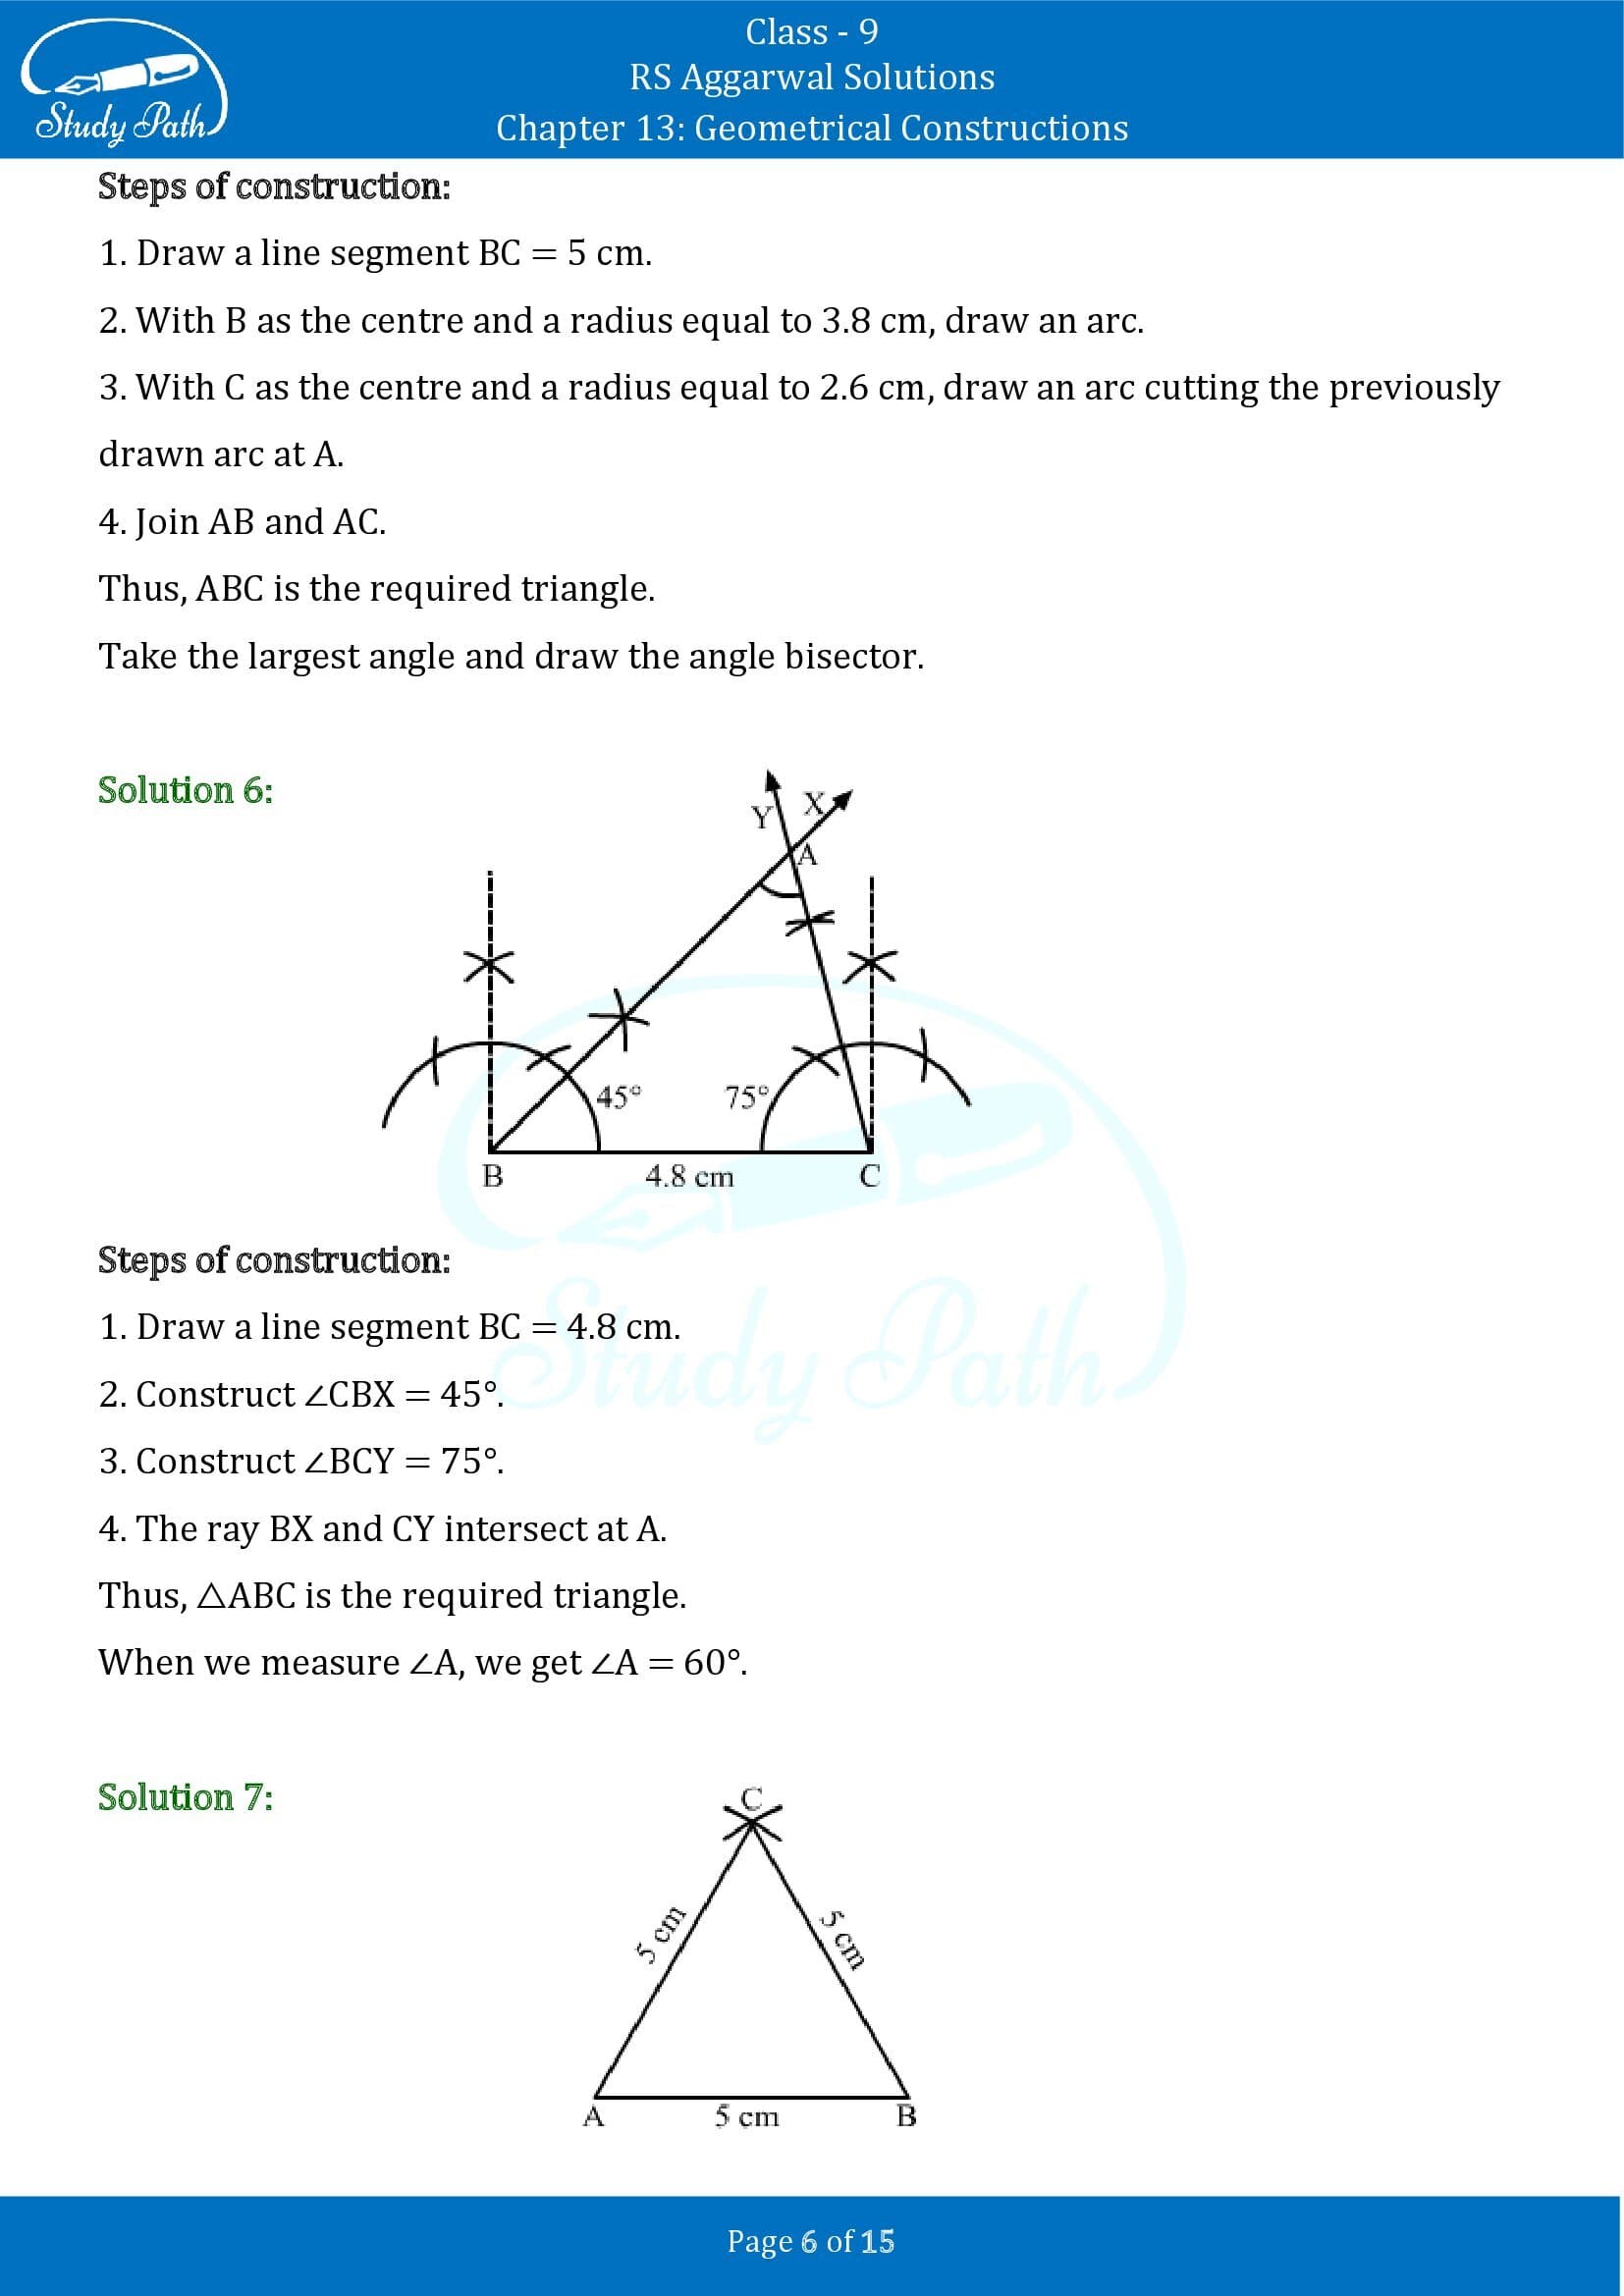 RS Aggarwal Solutions Class 9 Chapter 13 Geometrical Constructions 06